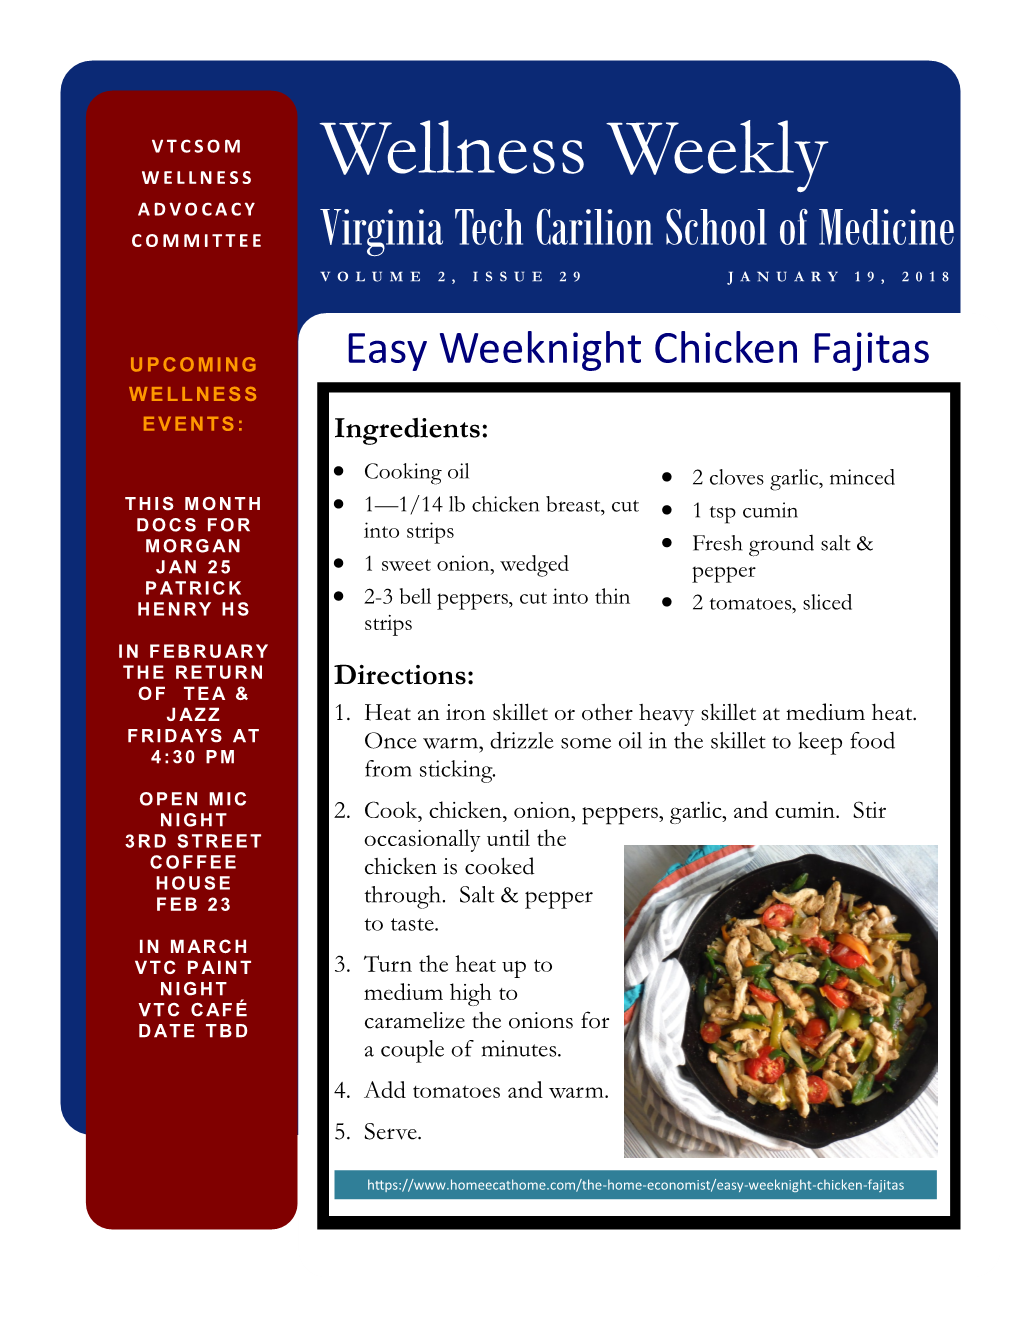 Wellness Weekly a D V O C a C Y COMMITTEE Virginia Tech Carilion School of Medicine VOLUME 2, ISSUE 29 JANUARY 19, 2018